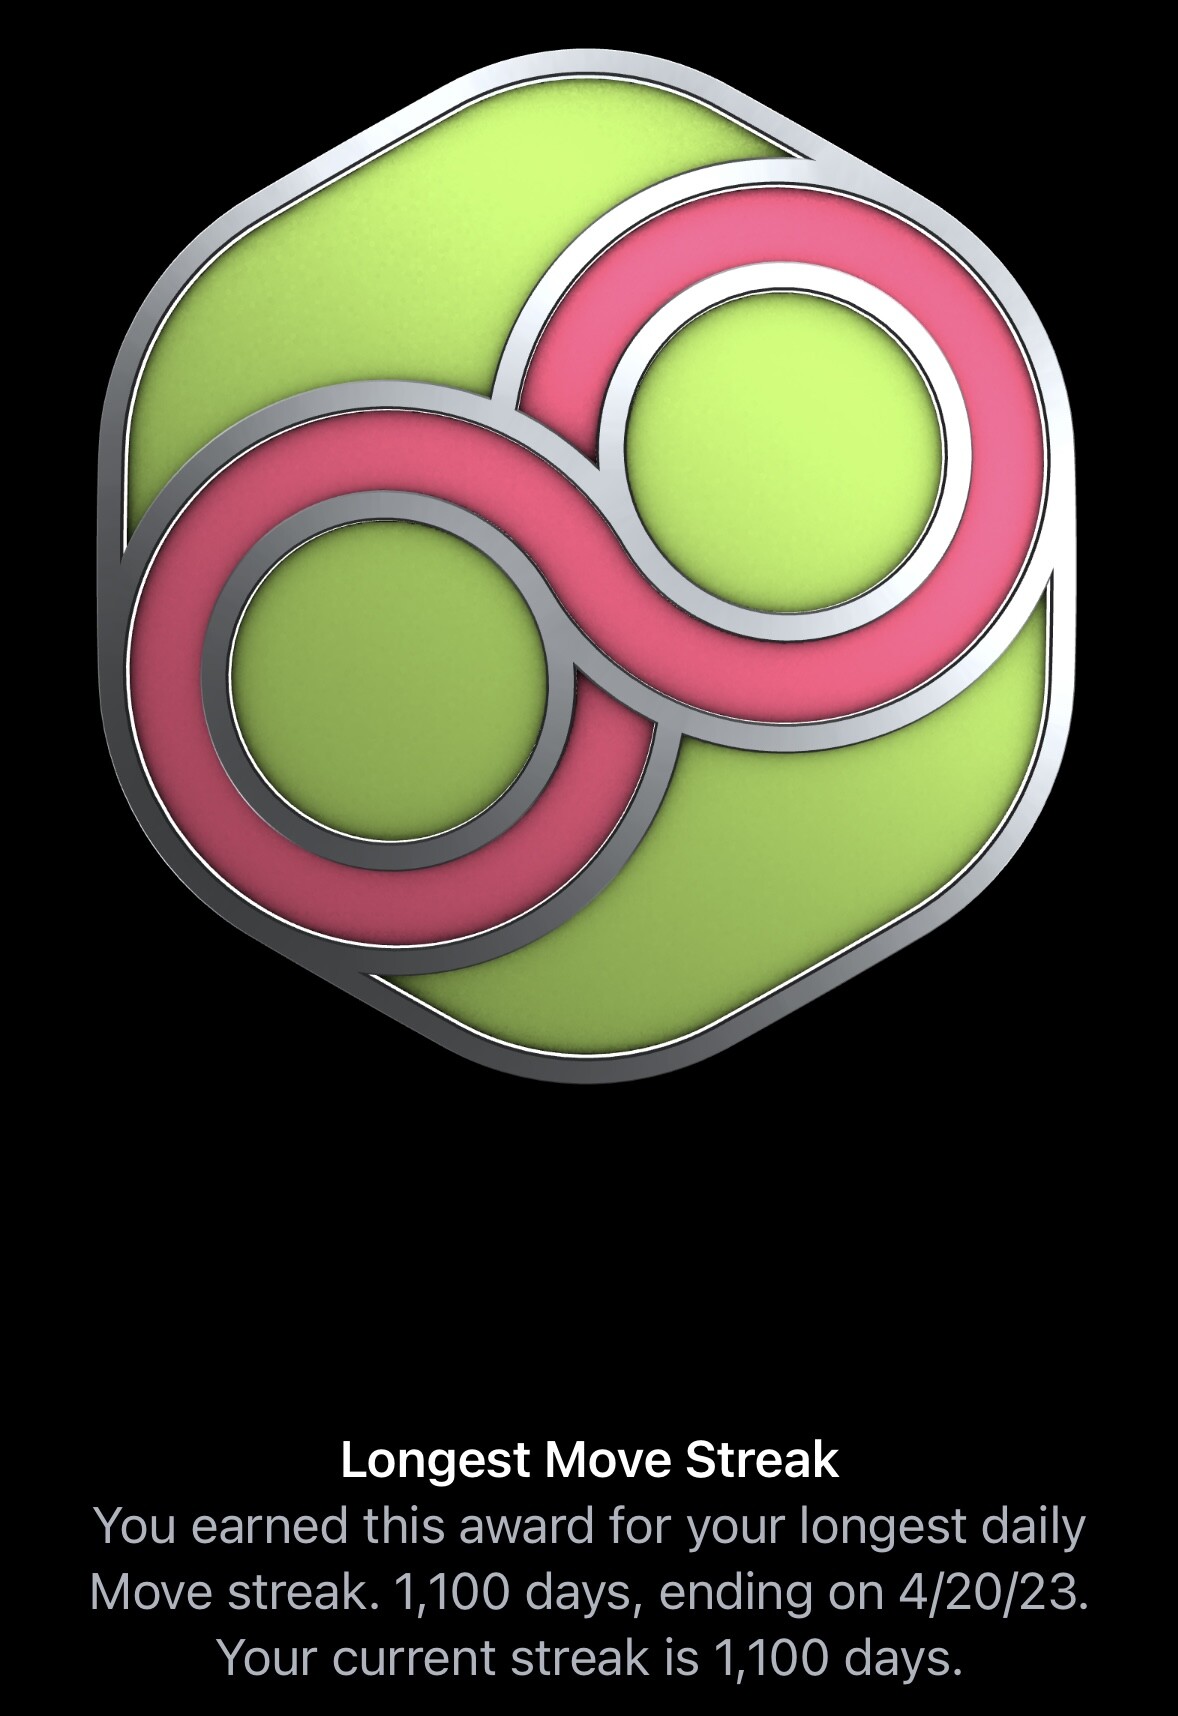 Screenshot of Apple Watch award: 
Longest Move Streak
You earned this award for your longest daily Move streak. 1,100 days, ending on 4/20/23.
Your current streak is 1,100 days.